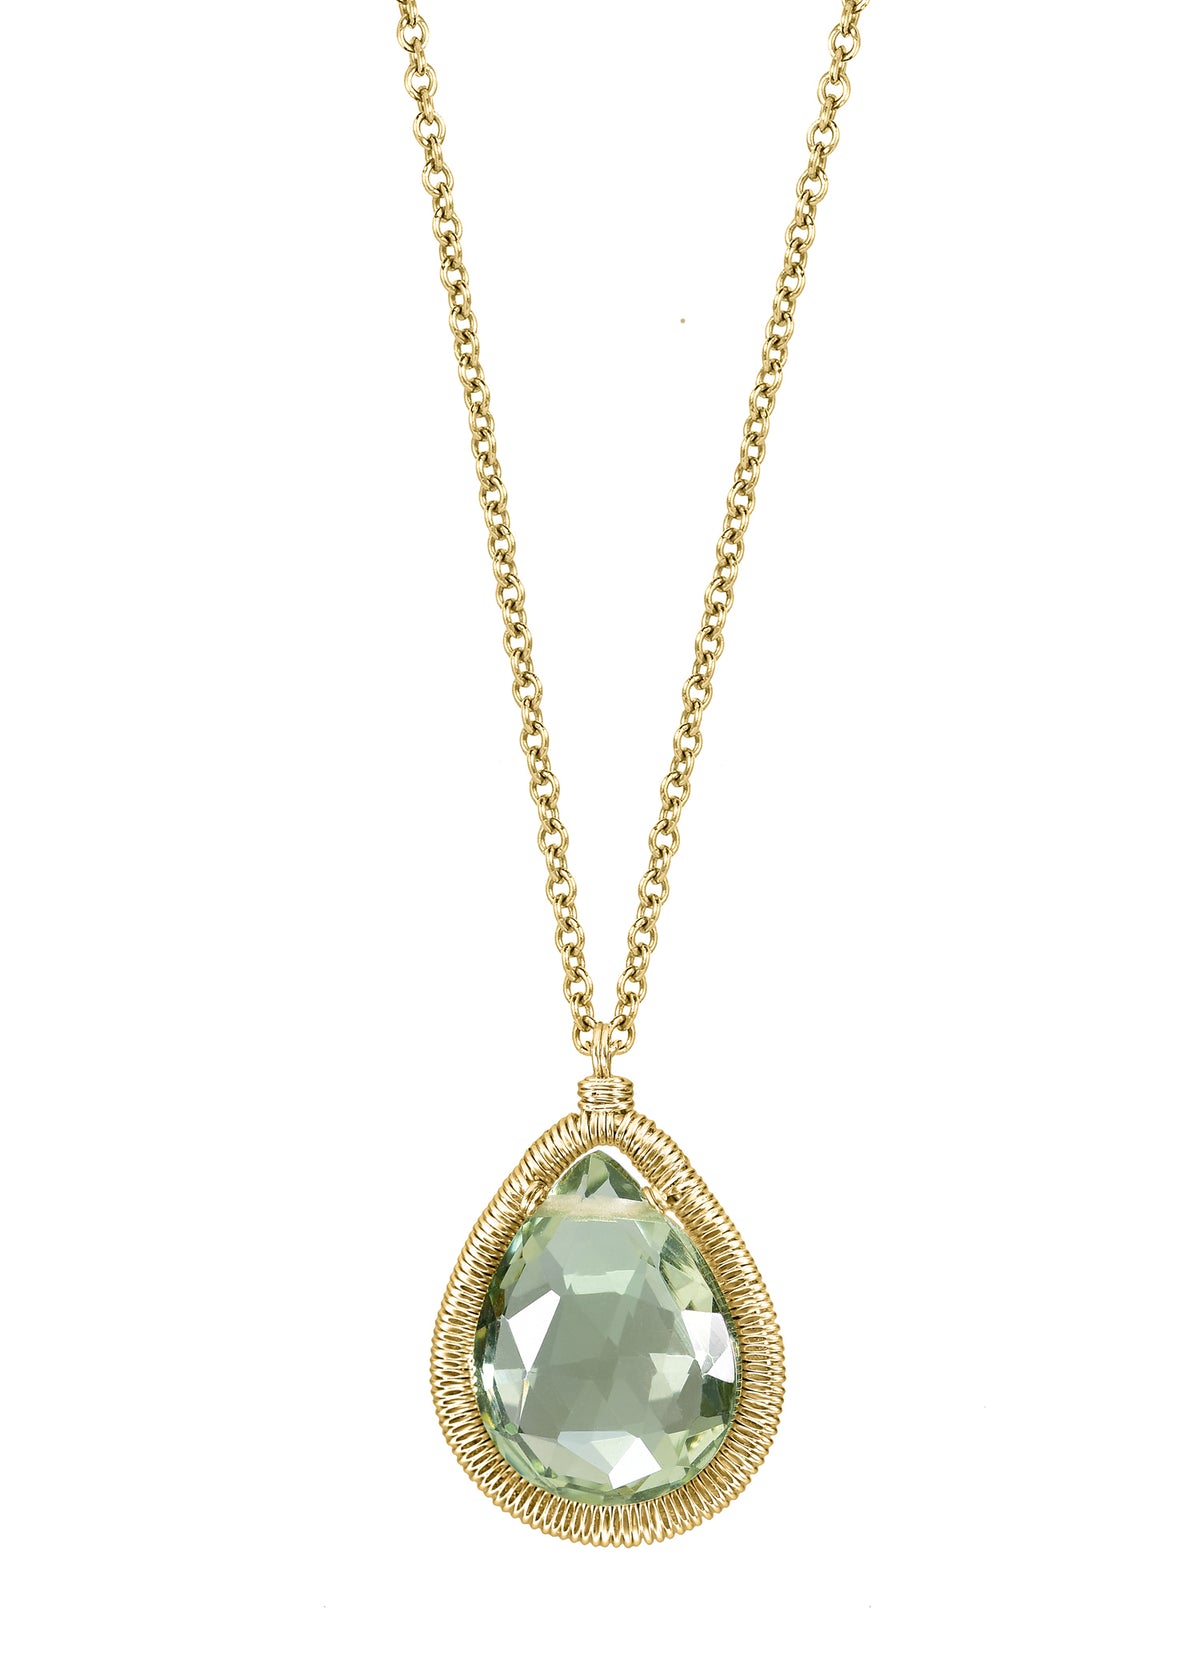 Green quartz 14k gold fill Necklace measures 16-3/4&quot; in length Pendant measures 5/8&quot; in length and 1/2&quot; in width at the widest point Handmade in our Los Angeles studio